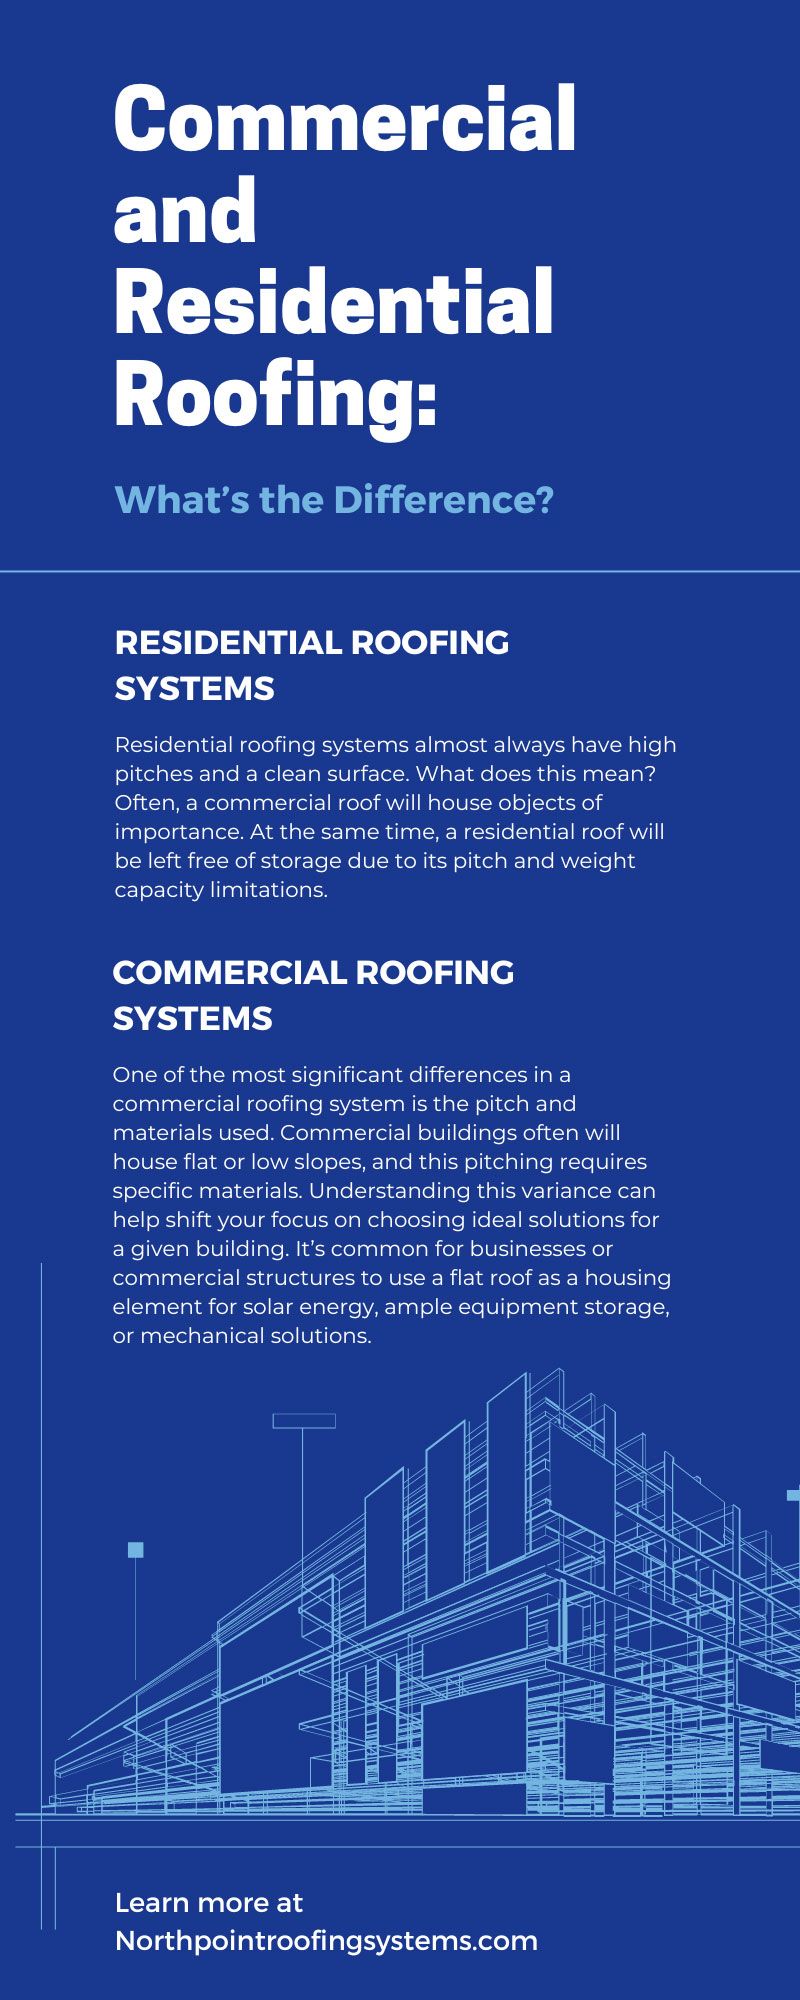 Commercial and Residential Roofing: What's the Difference?